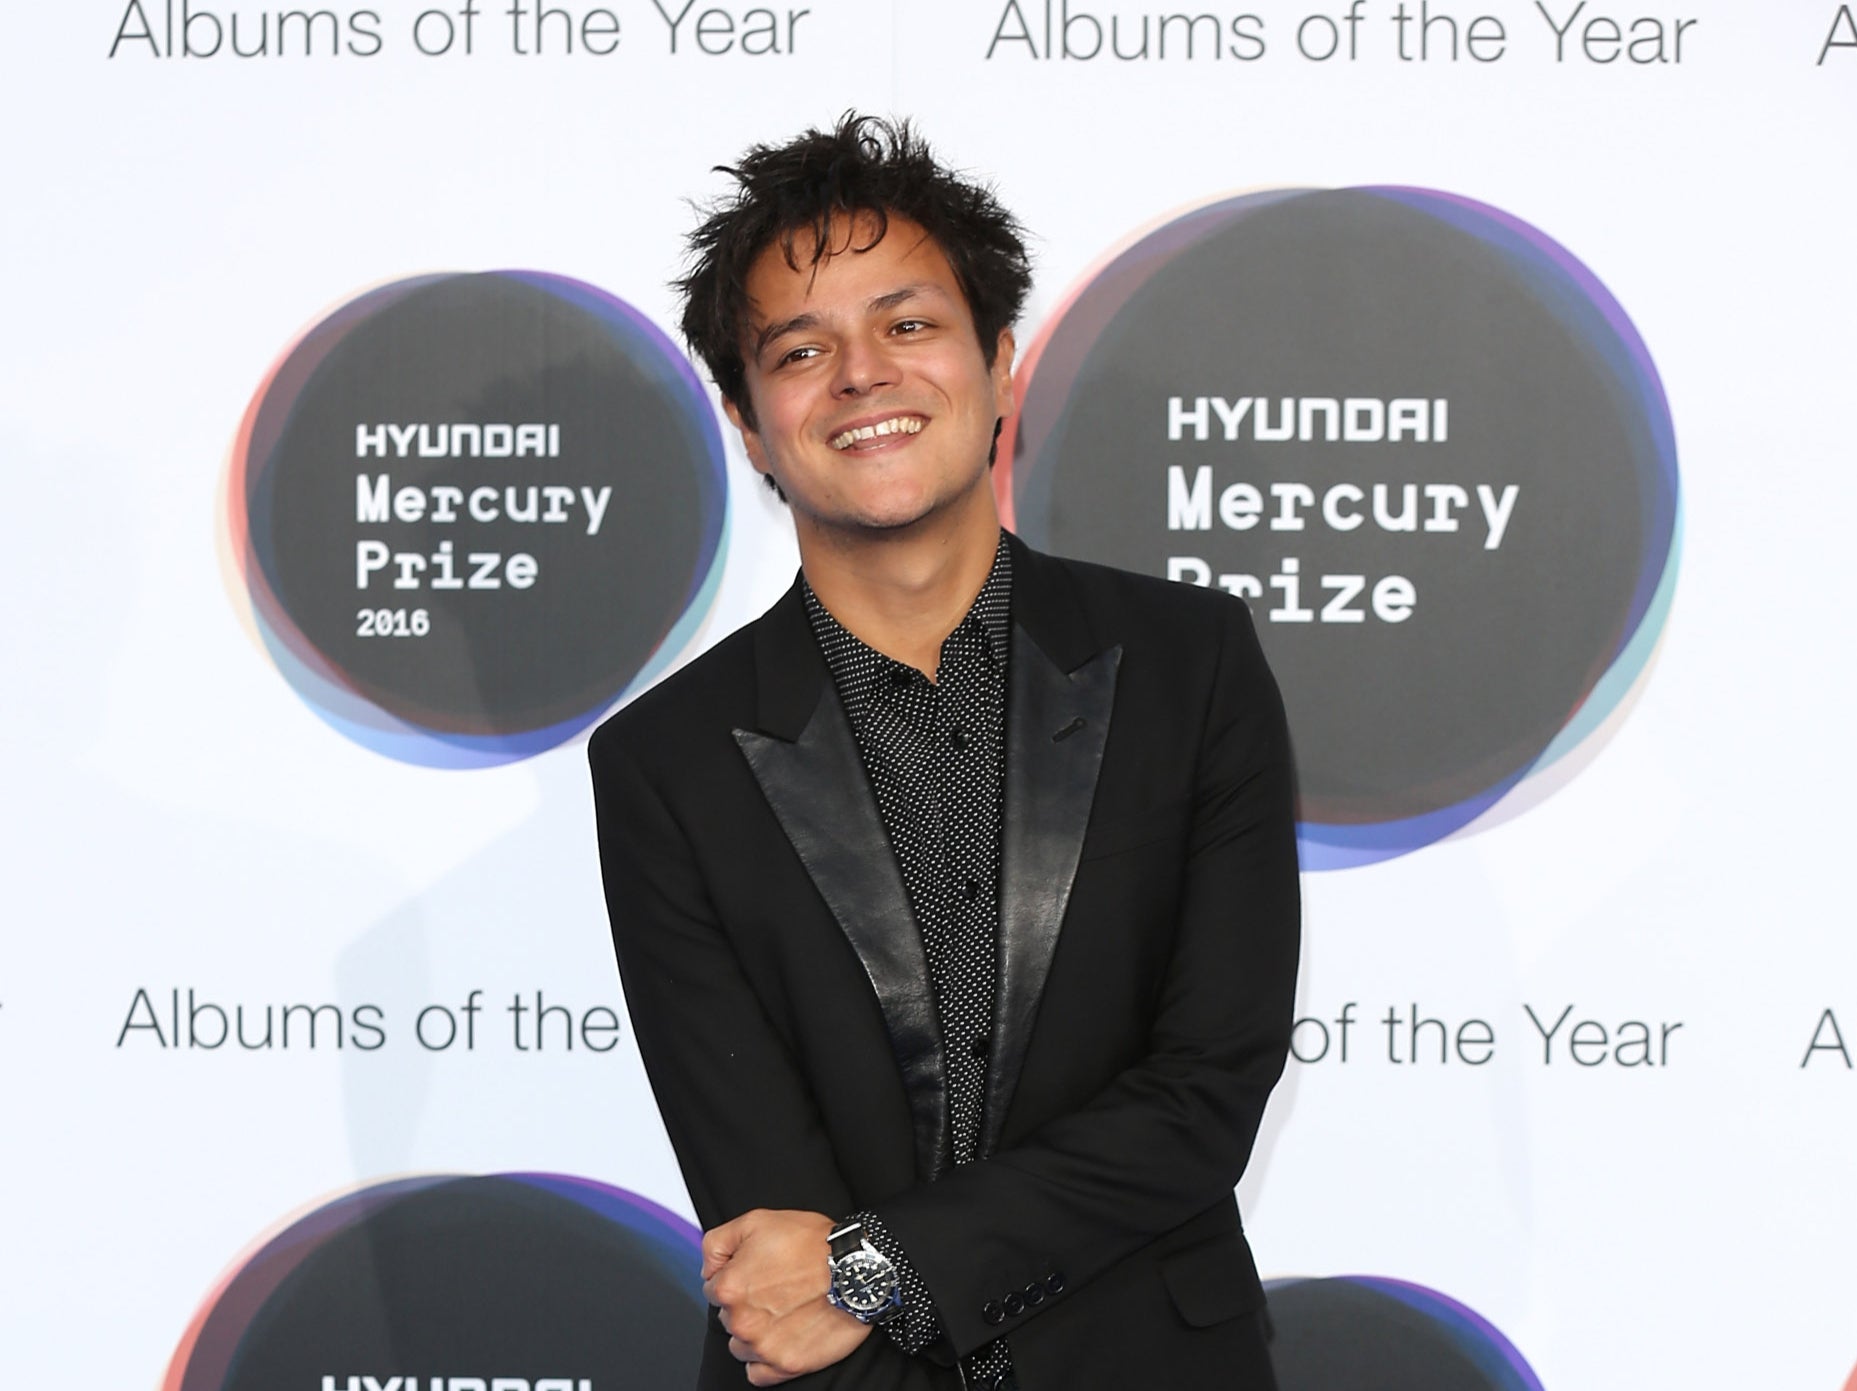 Mercury Prize judge Jamie Cullum: ‘Young people who make music are taking their influences from lots of leftfield sources